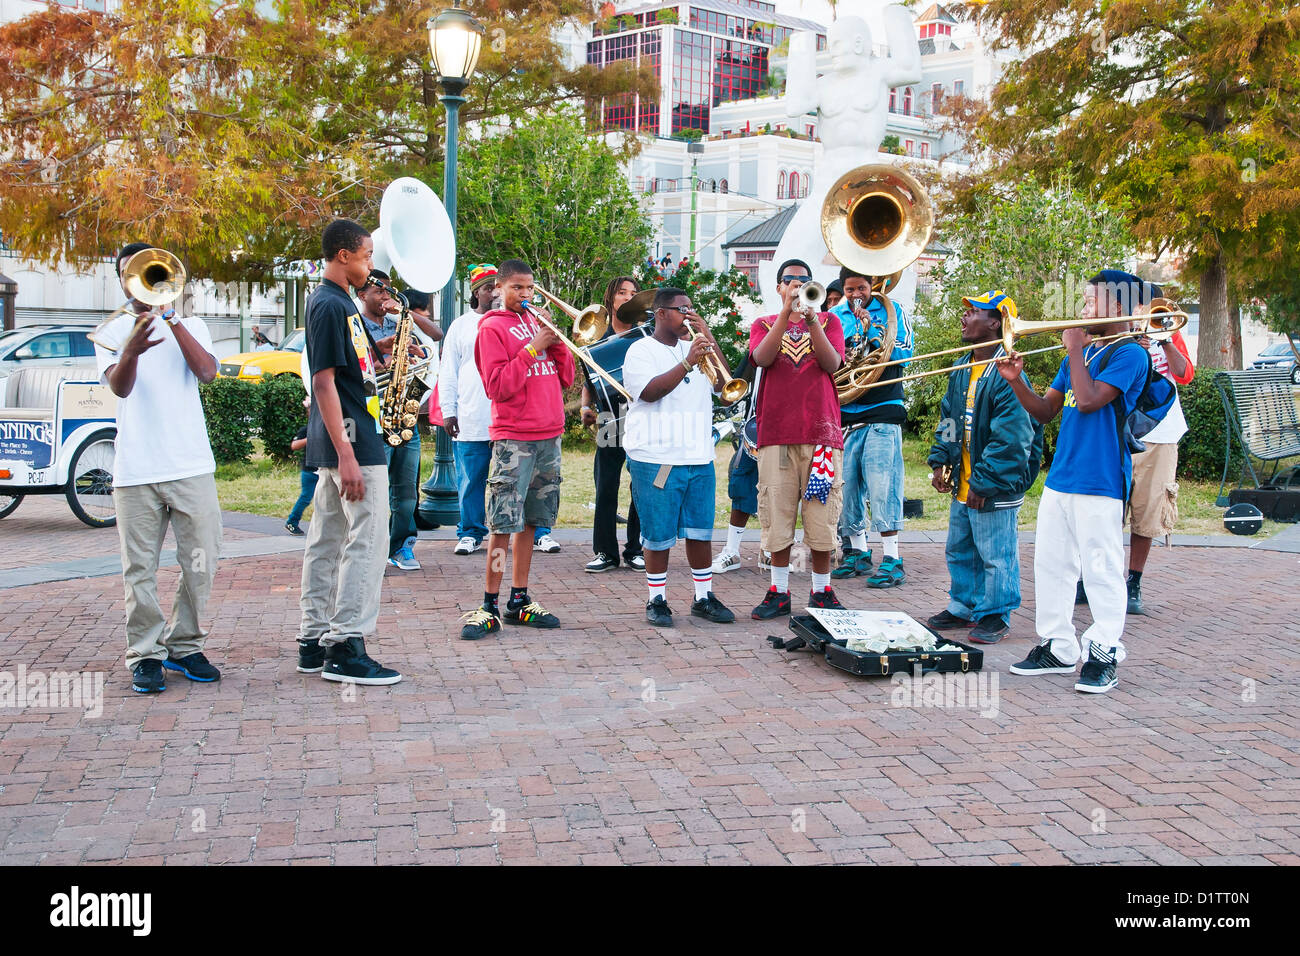 College jazz band meets by music coming cruise ship,  New Orleans, state of Louisiana, USA, North America Stock Photo